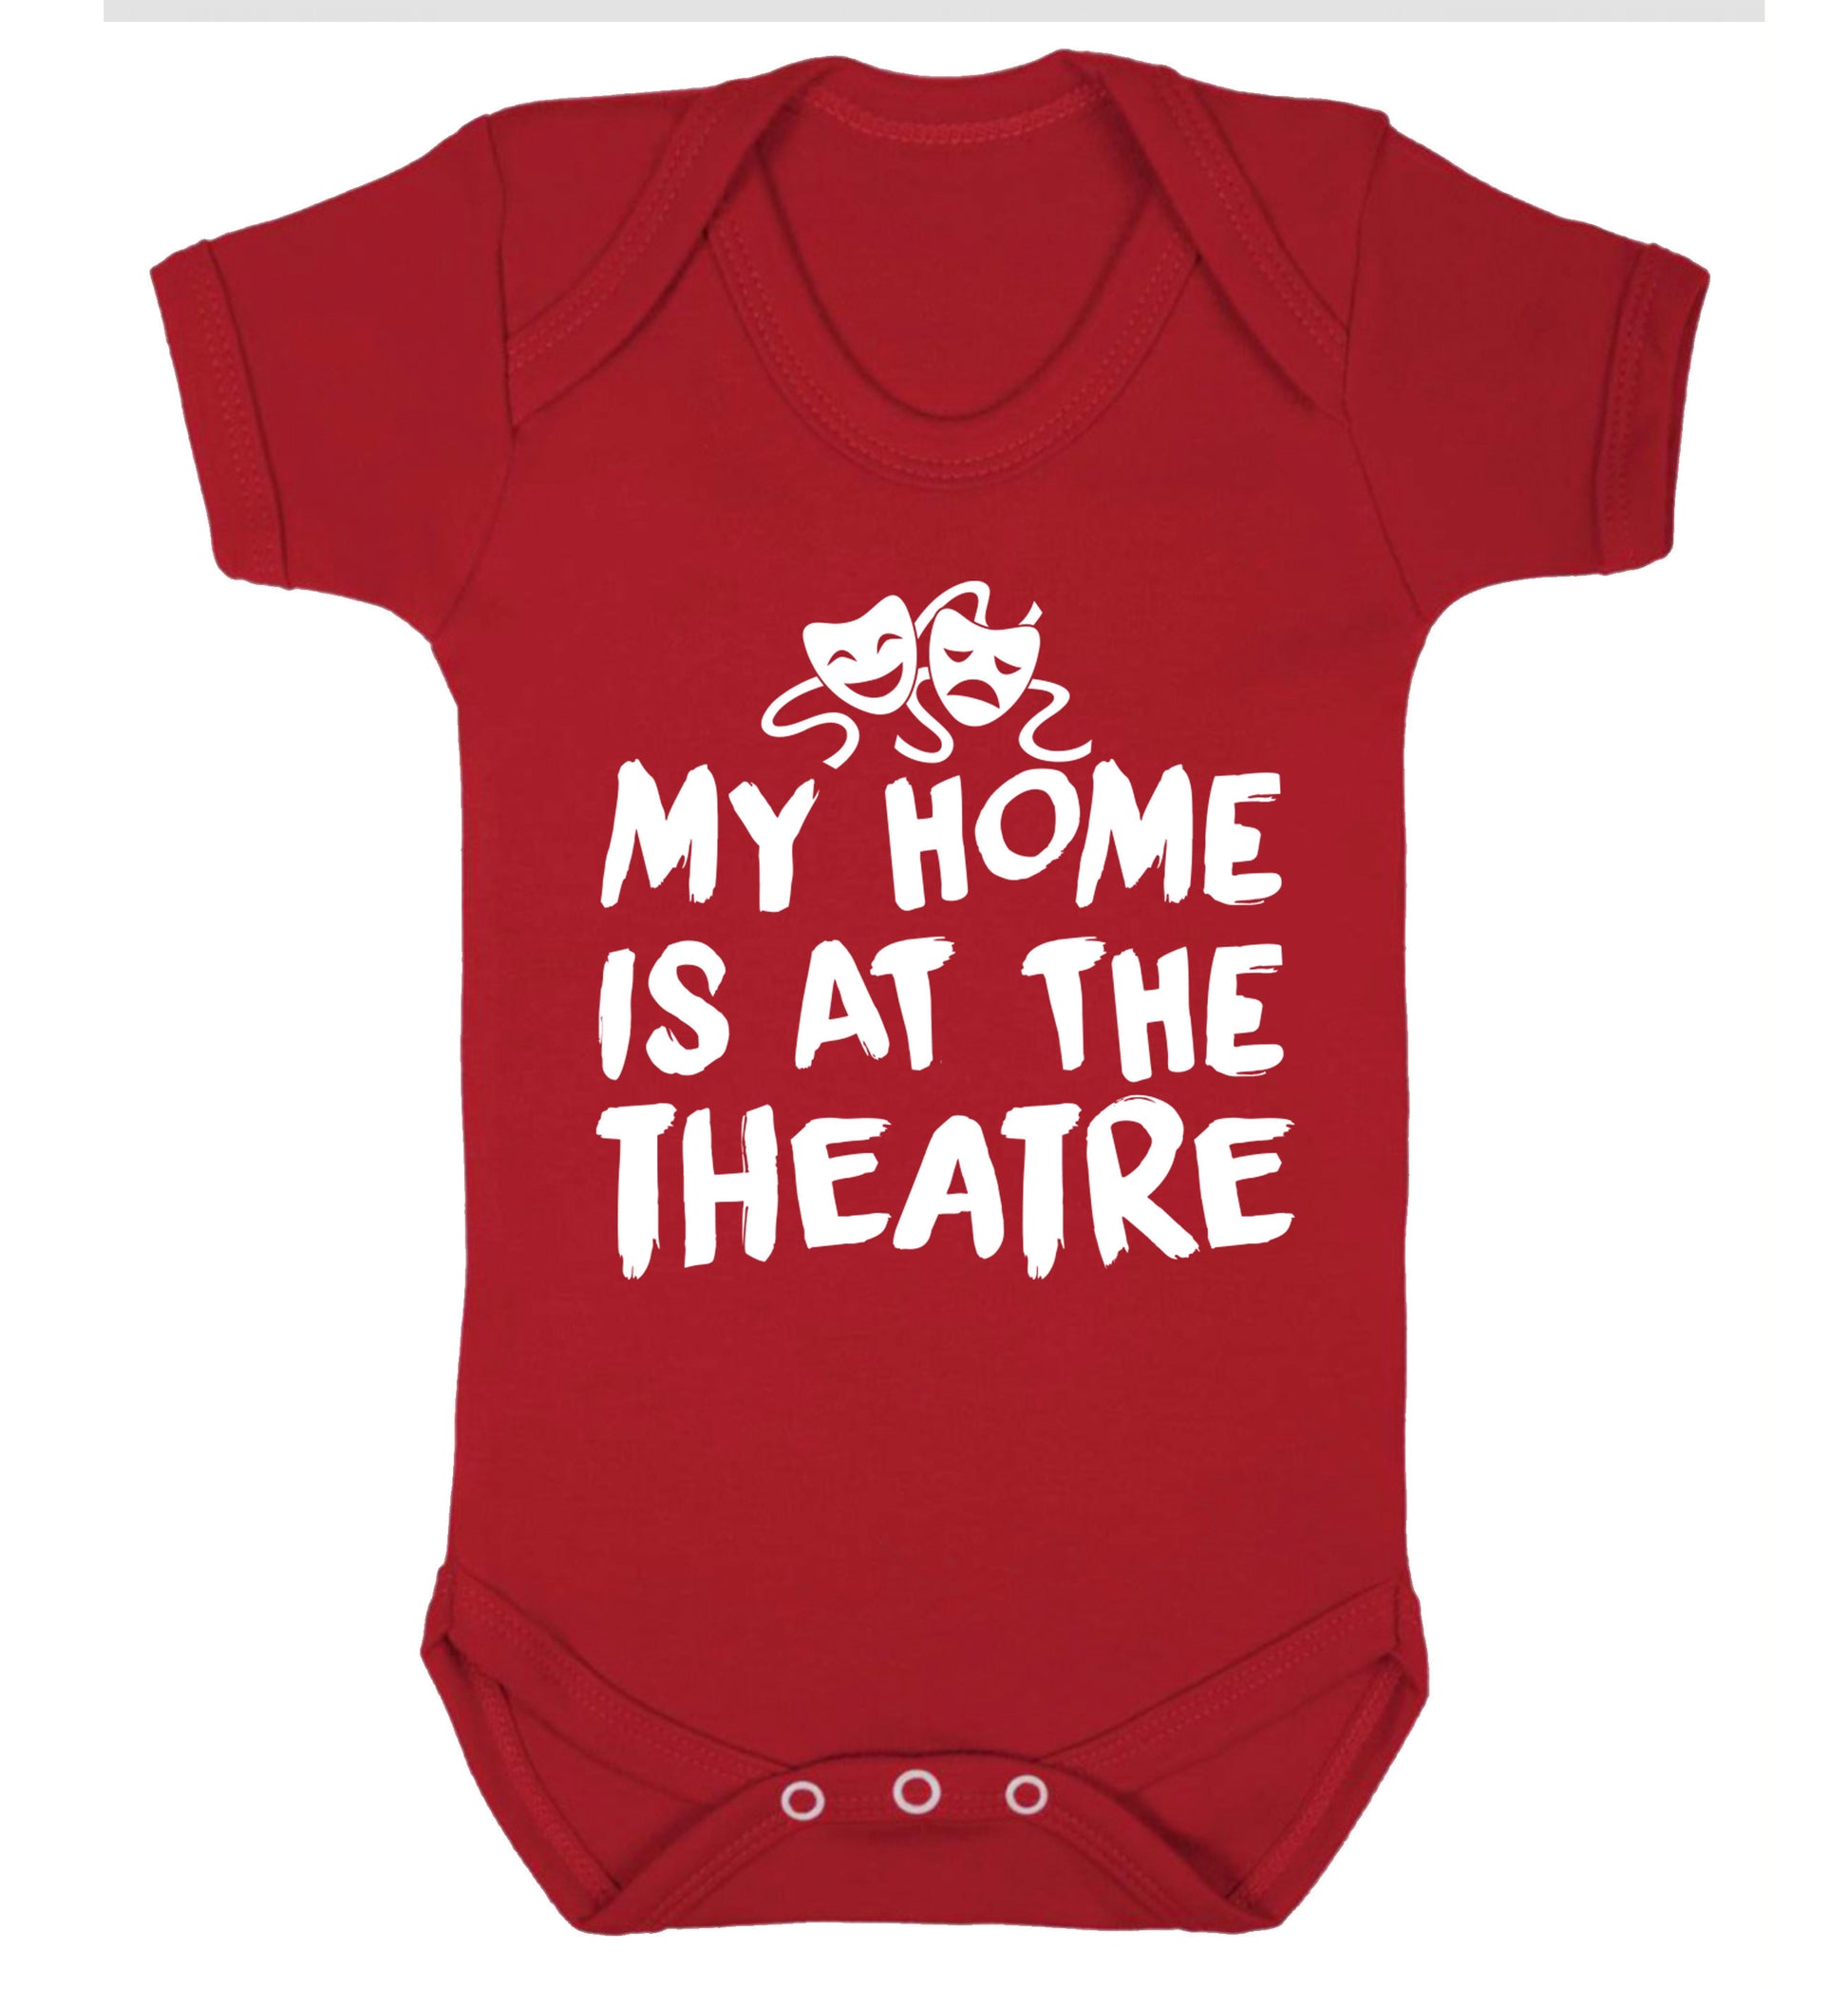 My home is at the theatre Baby Vest red 18-24 months